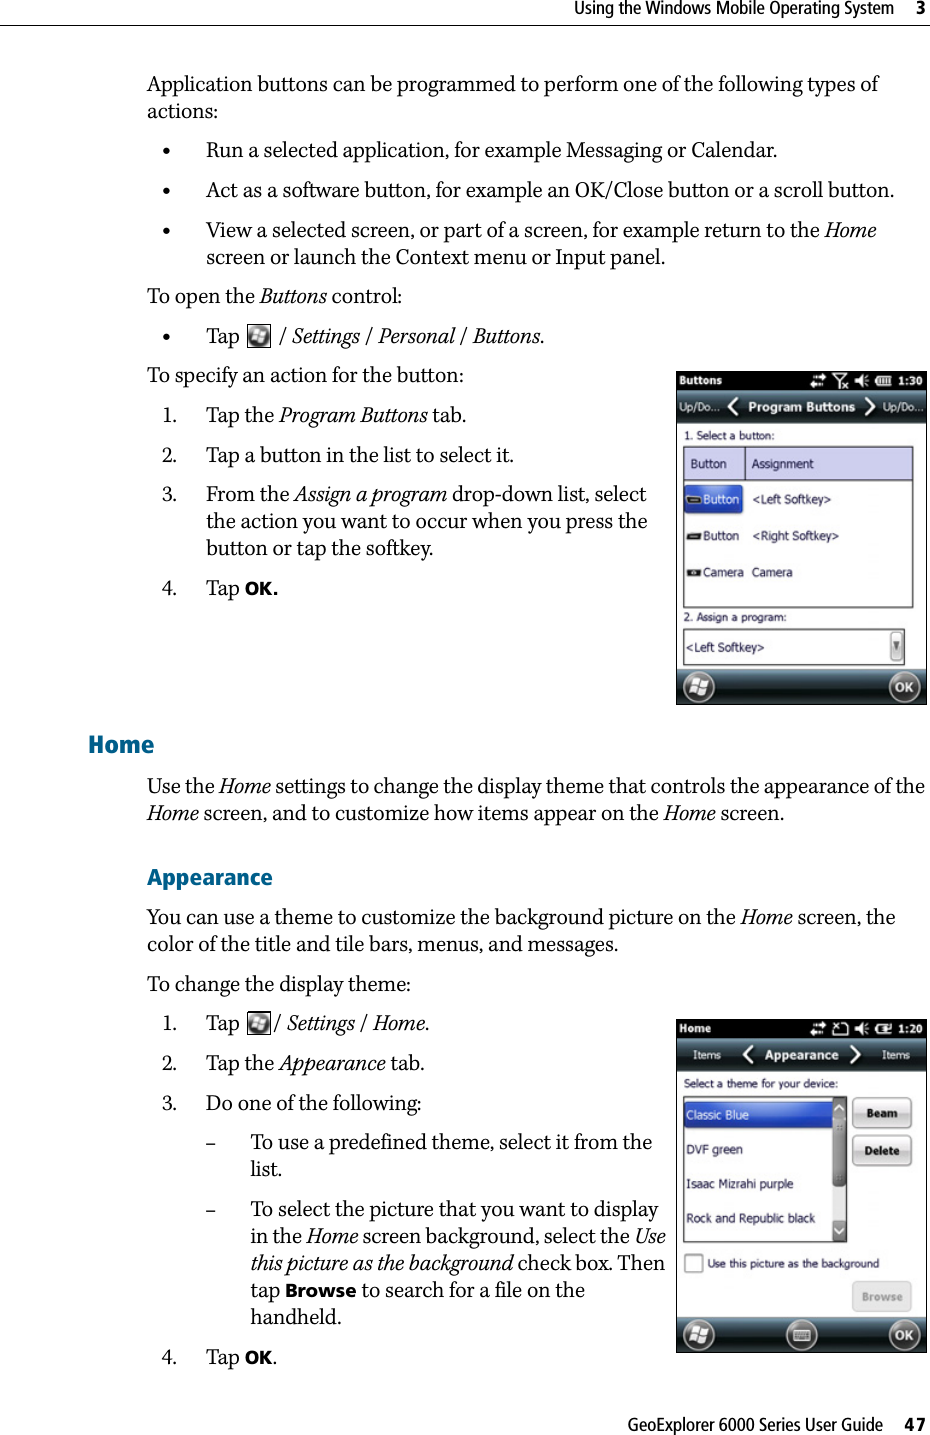 GeoExplorer 6000 Series User Guide     47Using the Windows Mobile Operating System     3Application buttons can be programmed to perform one of the following types of actions:•Run a selected application, for example Messaging or Calendar.•Act as a software button, for example an OK/Close button or a scroll button.•View a selected screen, or part of a screen, for example return to the Home screen or launch the Context menu or Input panel.To open the Buttons control: •Tap   /Settings /Personal / Buttons. To specify an action for the button: 1. Tap the Program Buttons tab.2. Tap a button in the list to select it.3. From the Assign a program drop-down list, select the action you want to occur when you press the button or tap the softkey.4. Tap OK.HomeUse the Home settings to change the display theme that controls the appearance of the Home screen, and to customize how items appear on the Home screen.AppearanceYou can use a theme to customize the background picture on the Home screen, the color of the title and tile bars, menus, and messages.To change the display theme:1. Tap / Settings /Home.  2. Tap the Appearance tab.  3. Do one of the following:–To use a predefined theme, select it from the list.–To select the picture that you want to display in the Home screen background, select the Use this picture as the background check box. Then tap Browse to search for a file on the handheld.4. Tap OK.